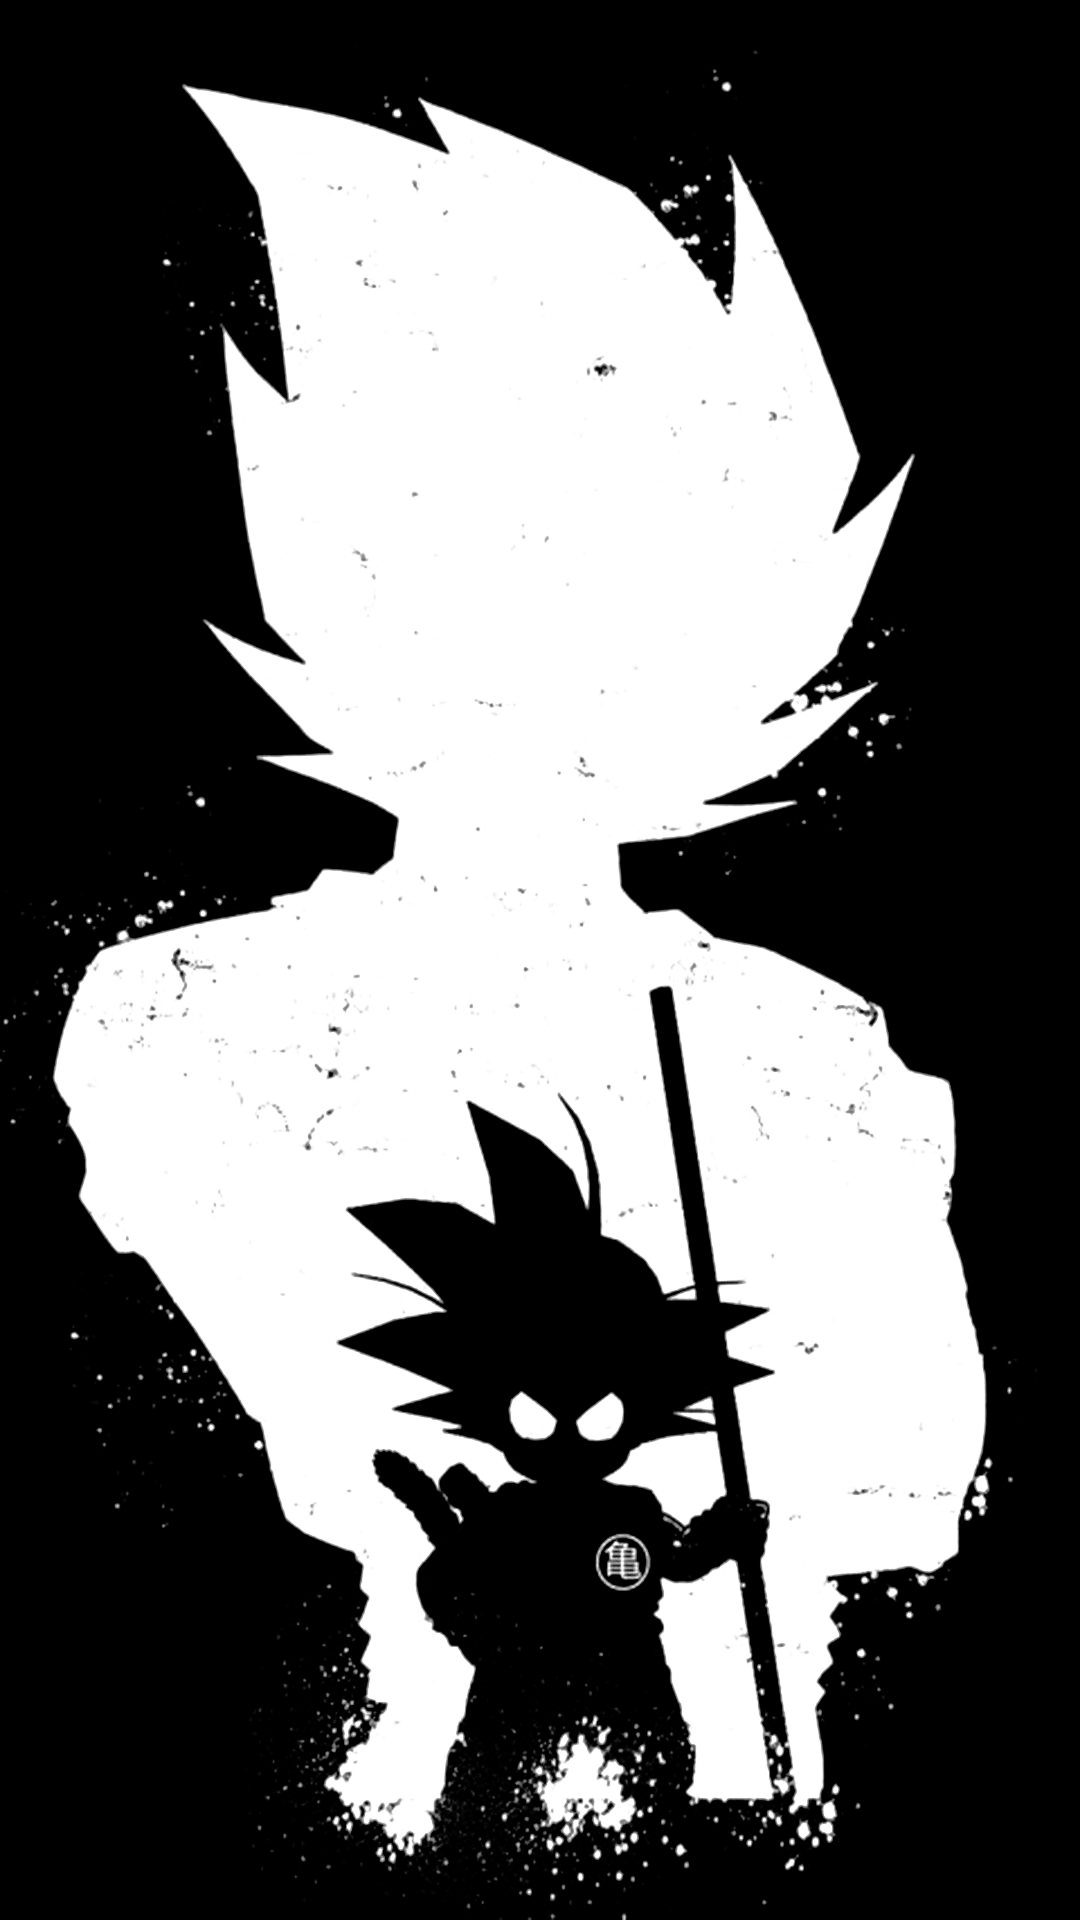 Two Shades of Goku [1080x1920]